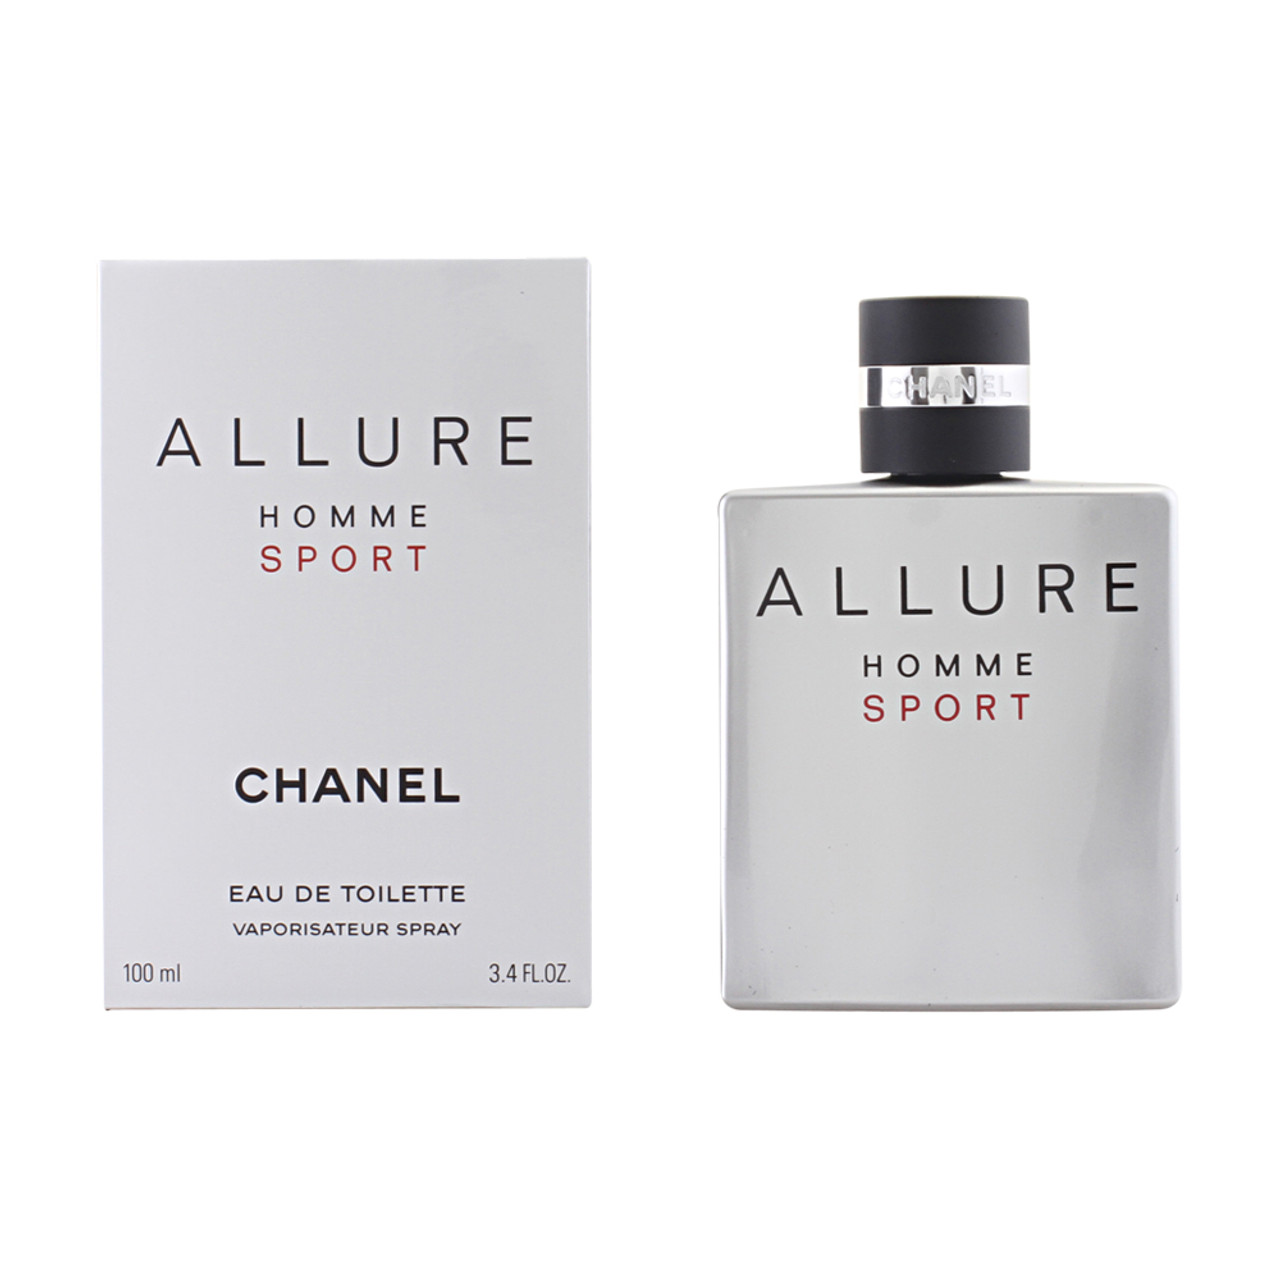 CHANEL ~ ALLURE HOMME SPORT COLOGNE SPRAY ~ 3.4 OZ